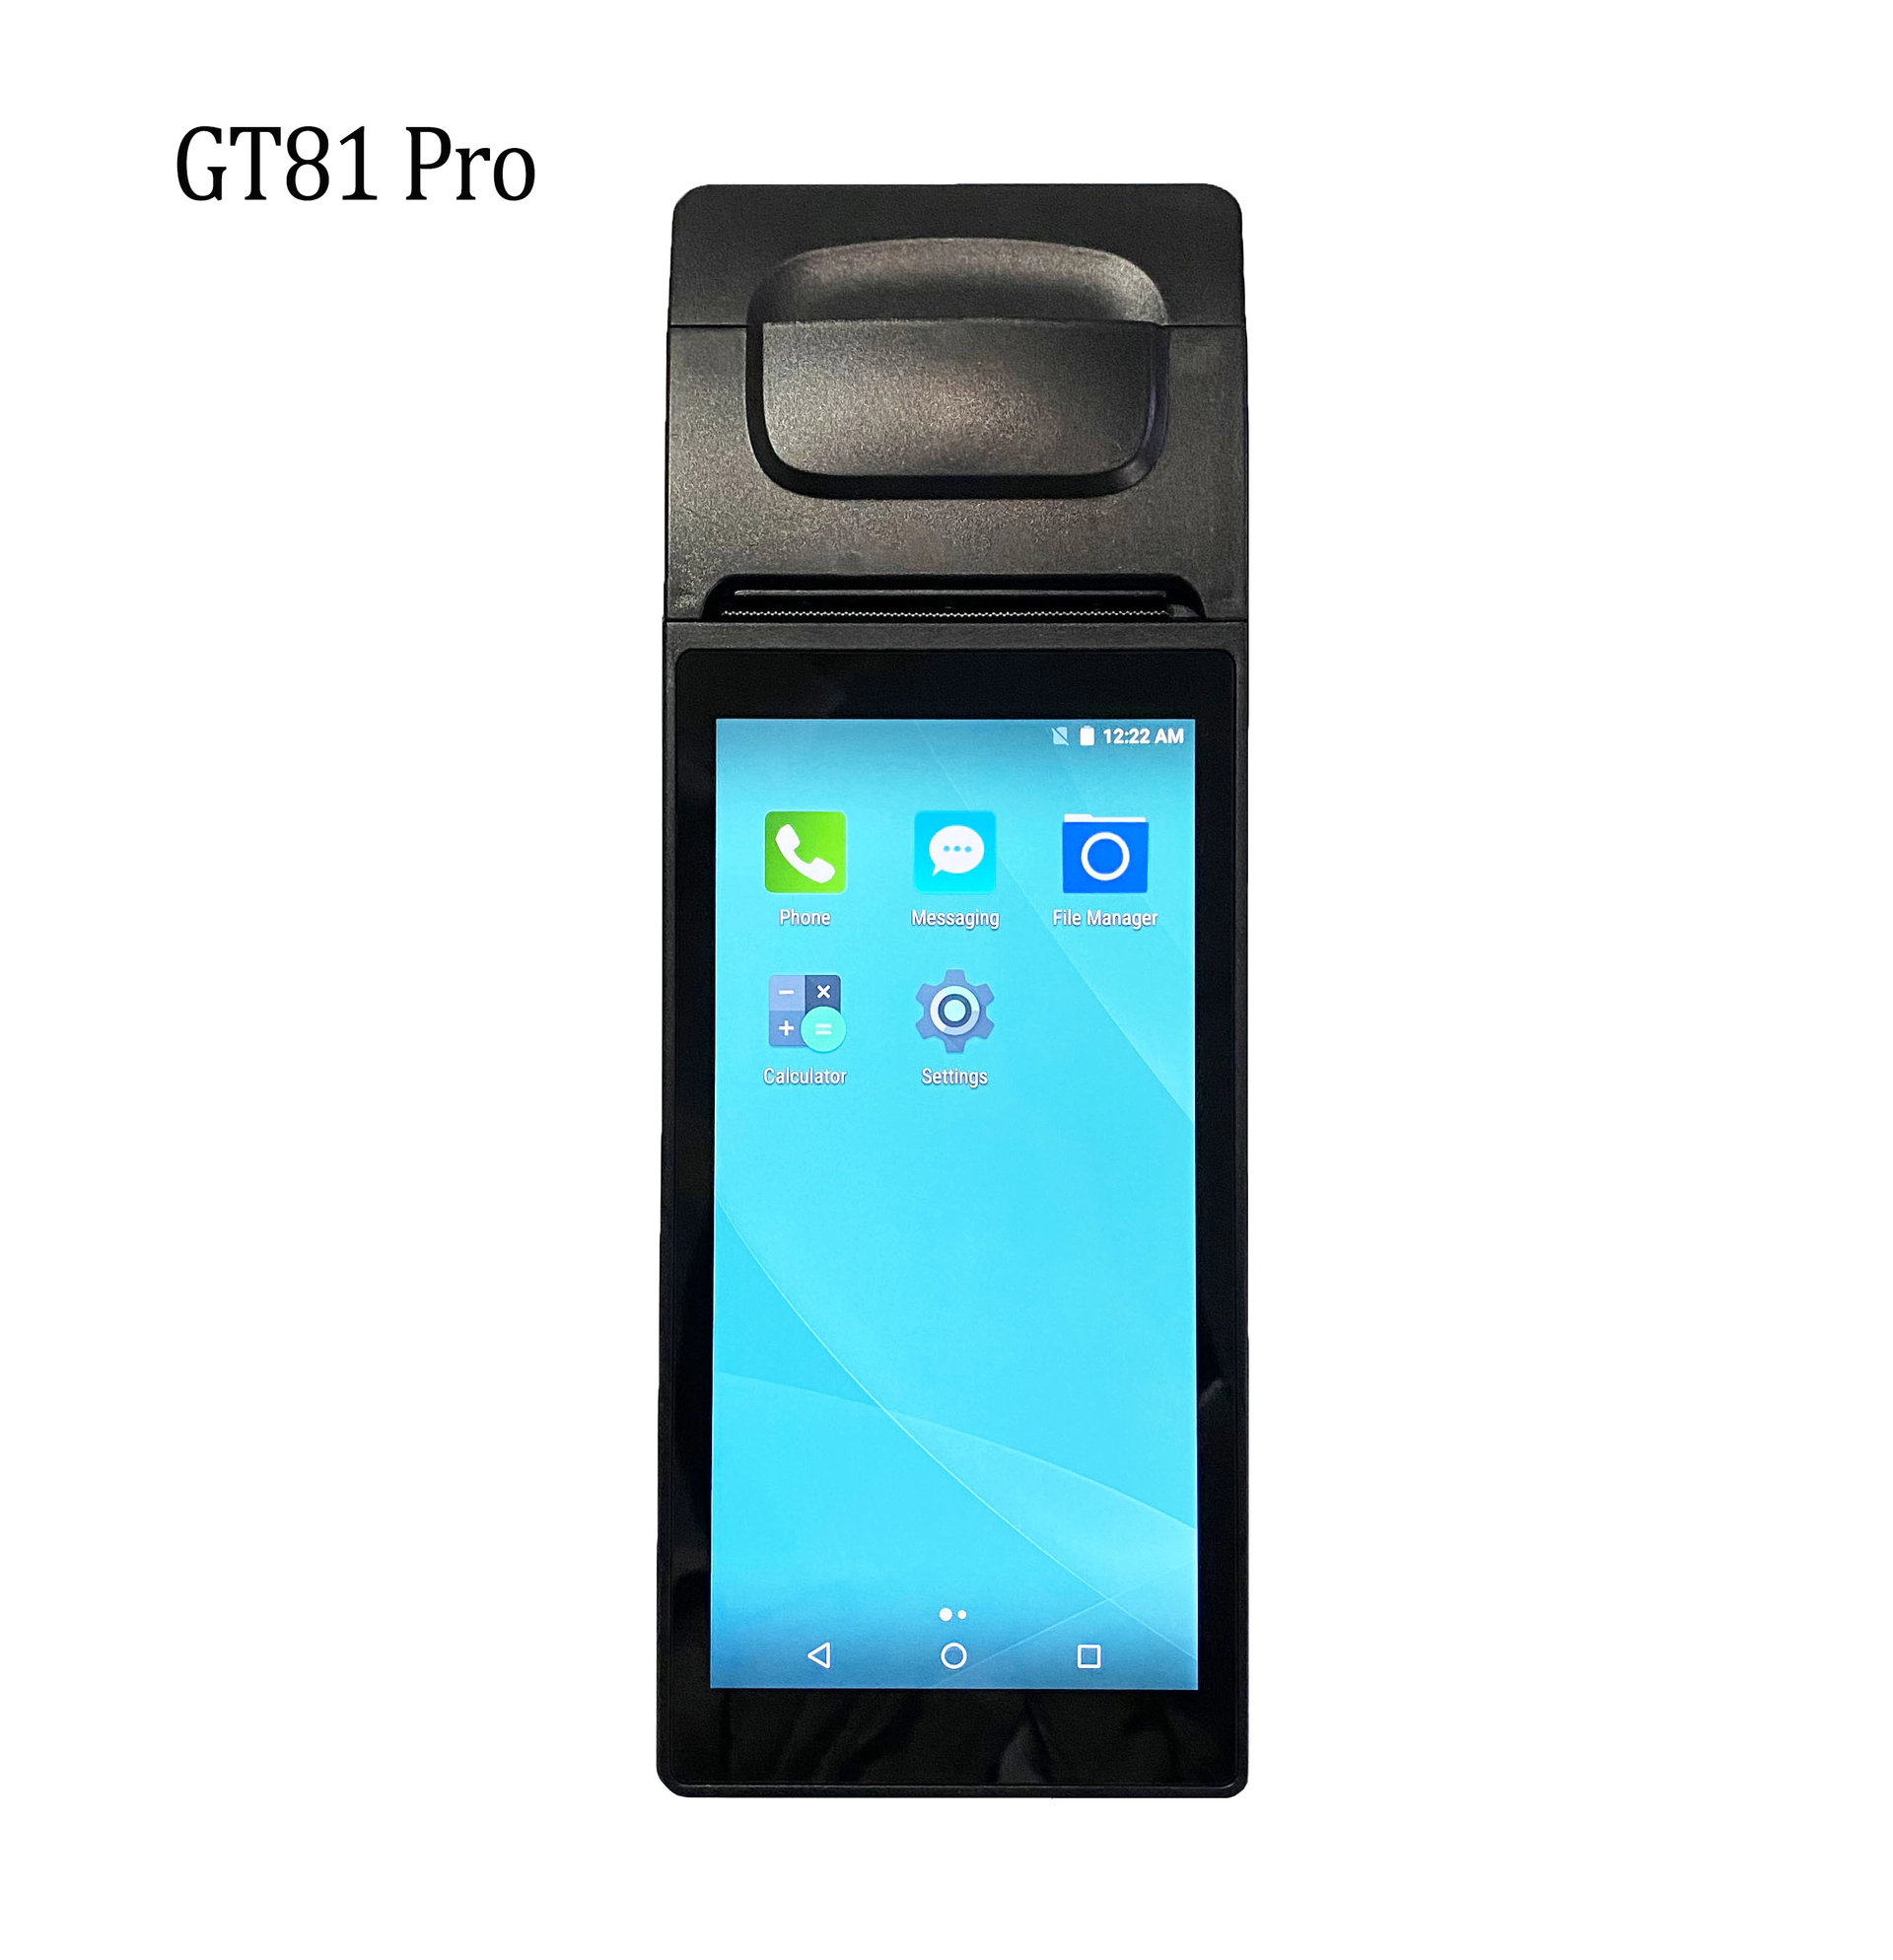 POS Terminal with Thermal Receipt Printer Portable Android 10.0 OS 2GB RAM 16GB ROM